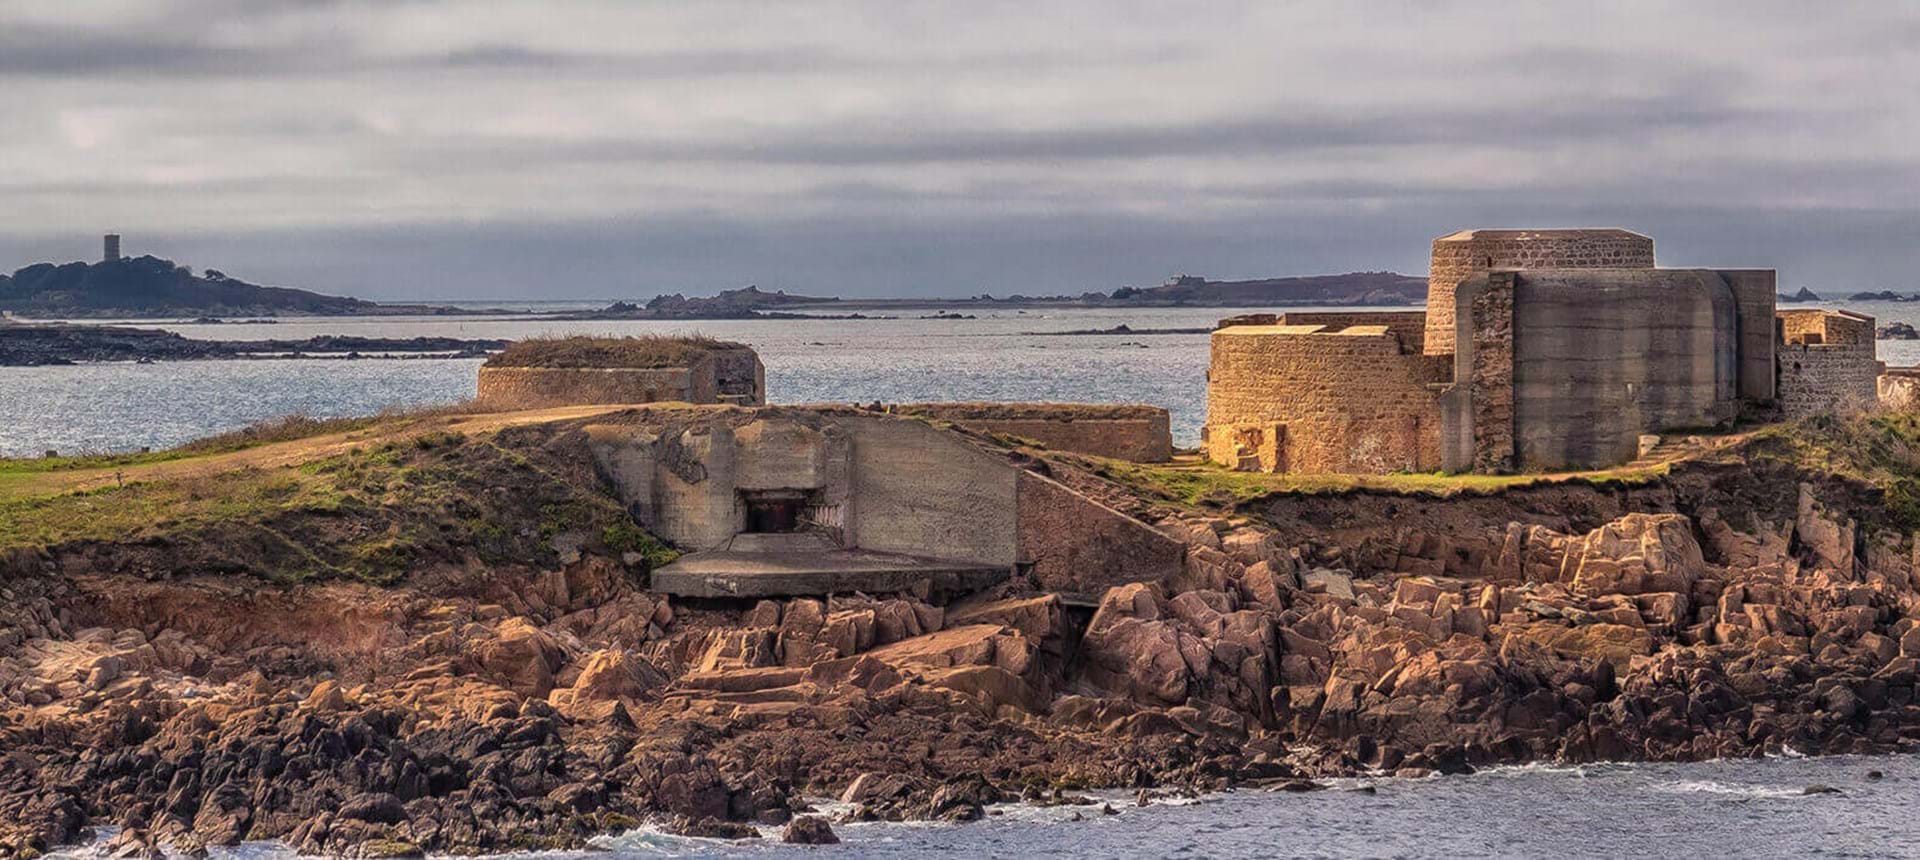 view of fort hommet in guernsey with sea in background